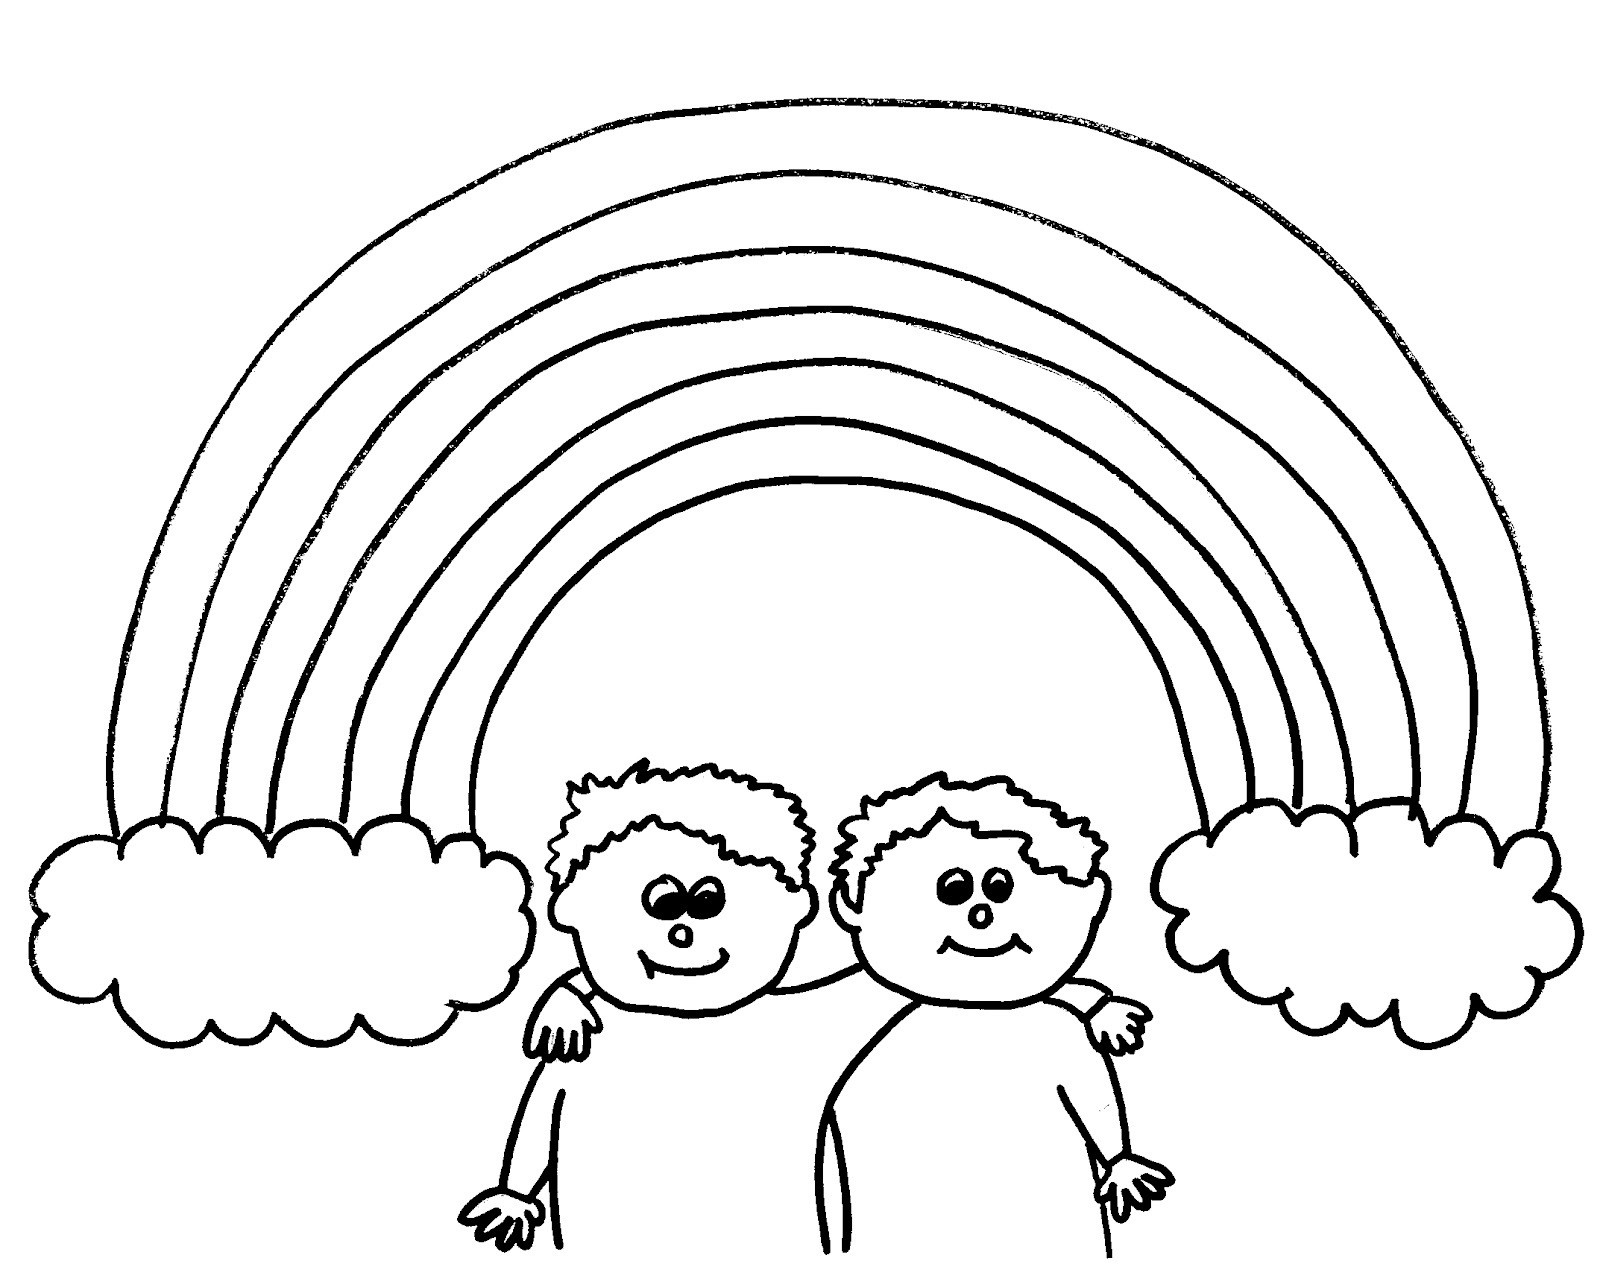 Rainbow Coloring Pages Printable
 Free Printable Rainbow Coloring Pages For Kids